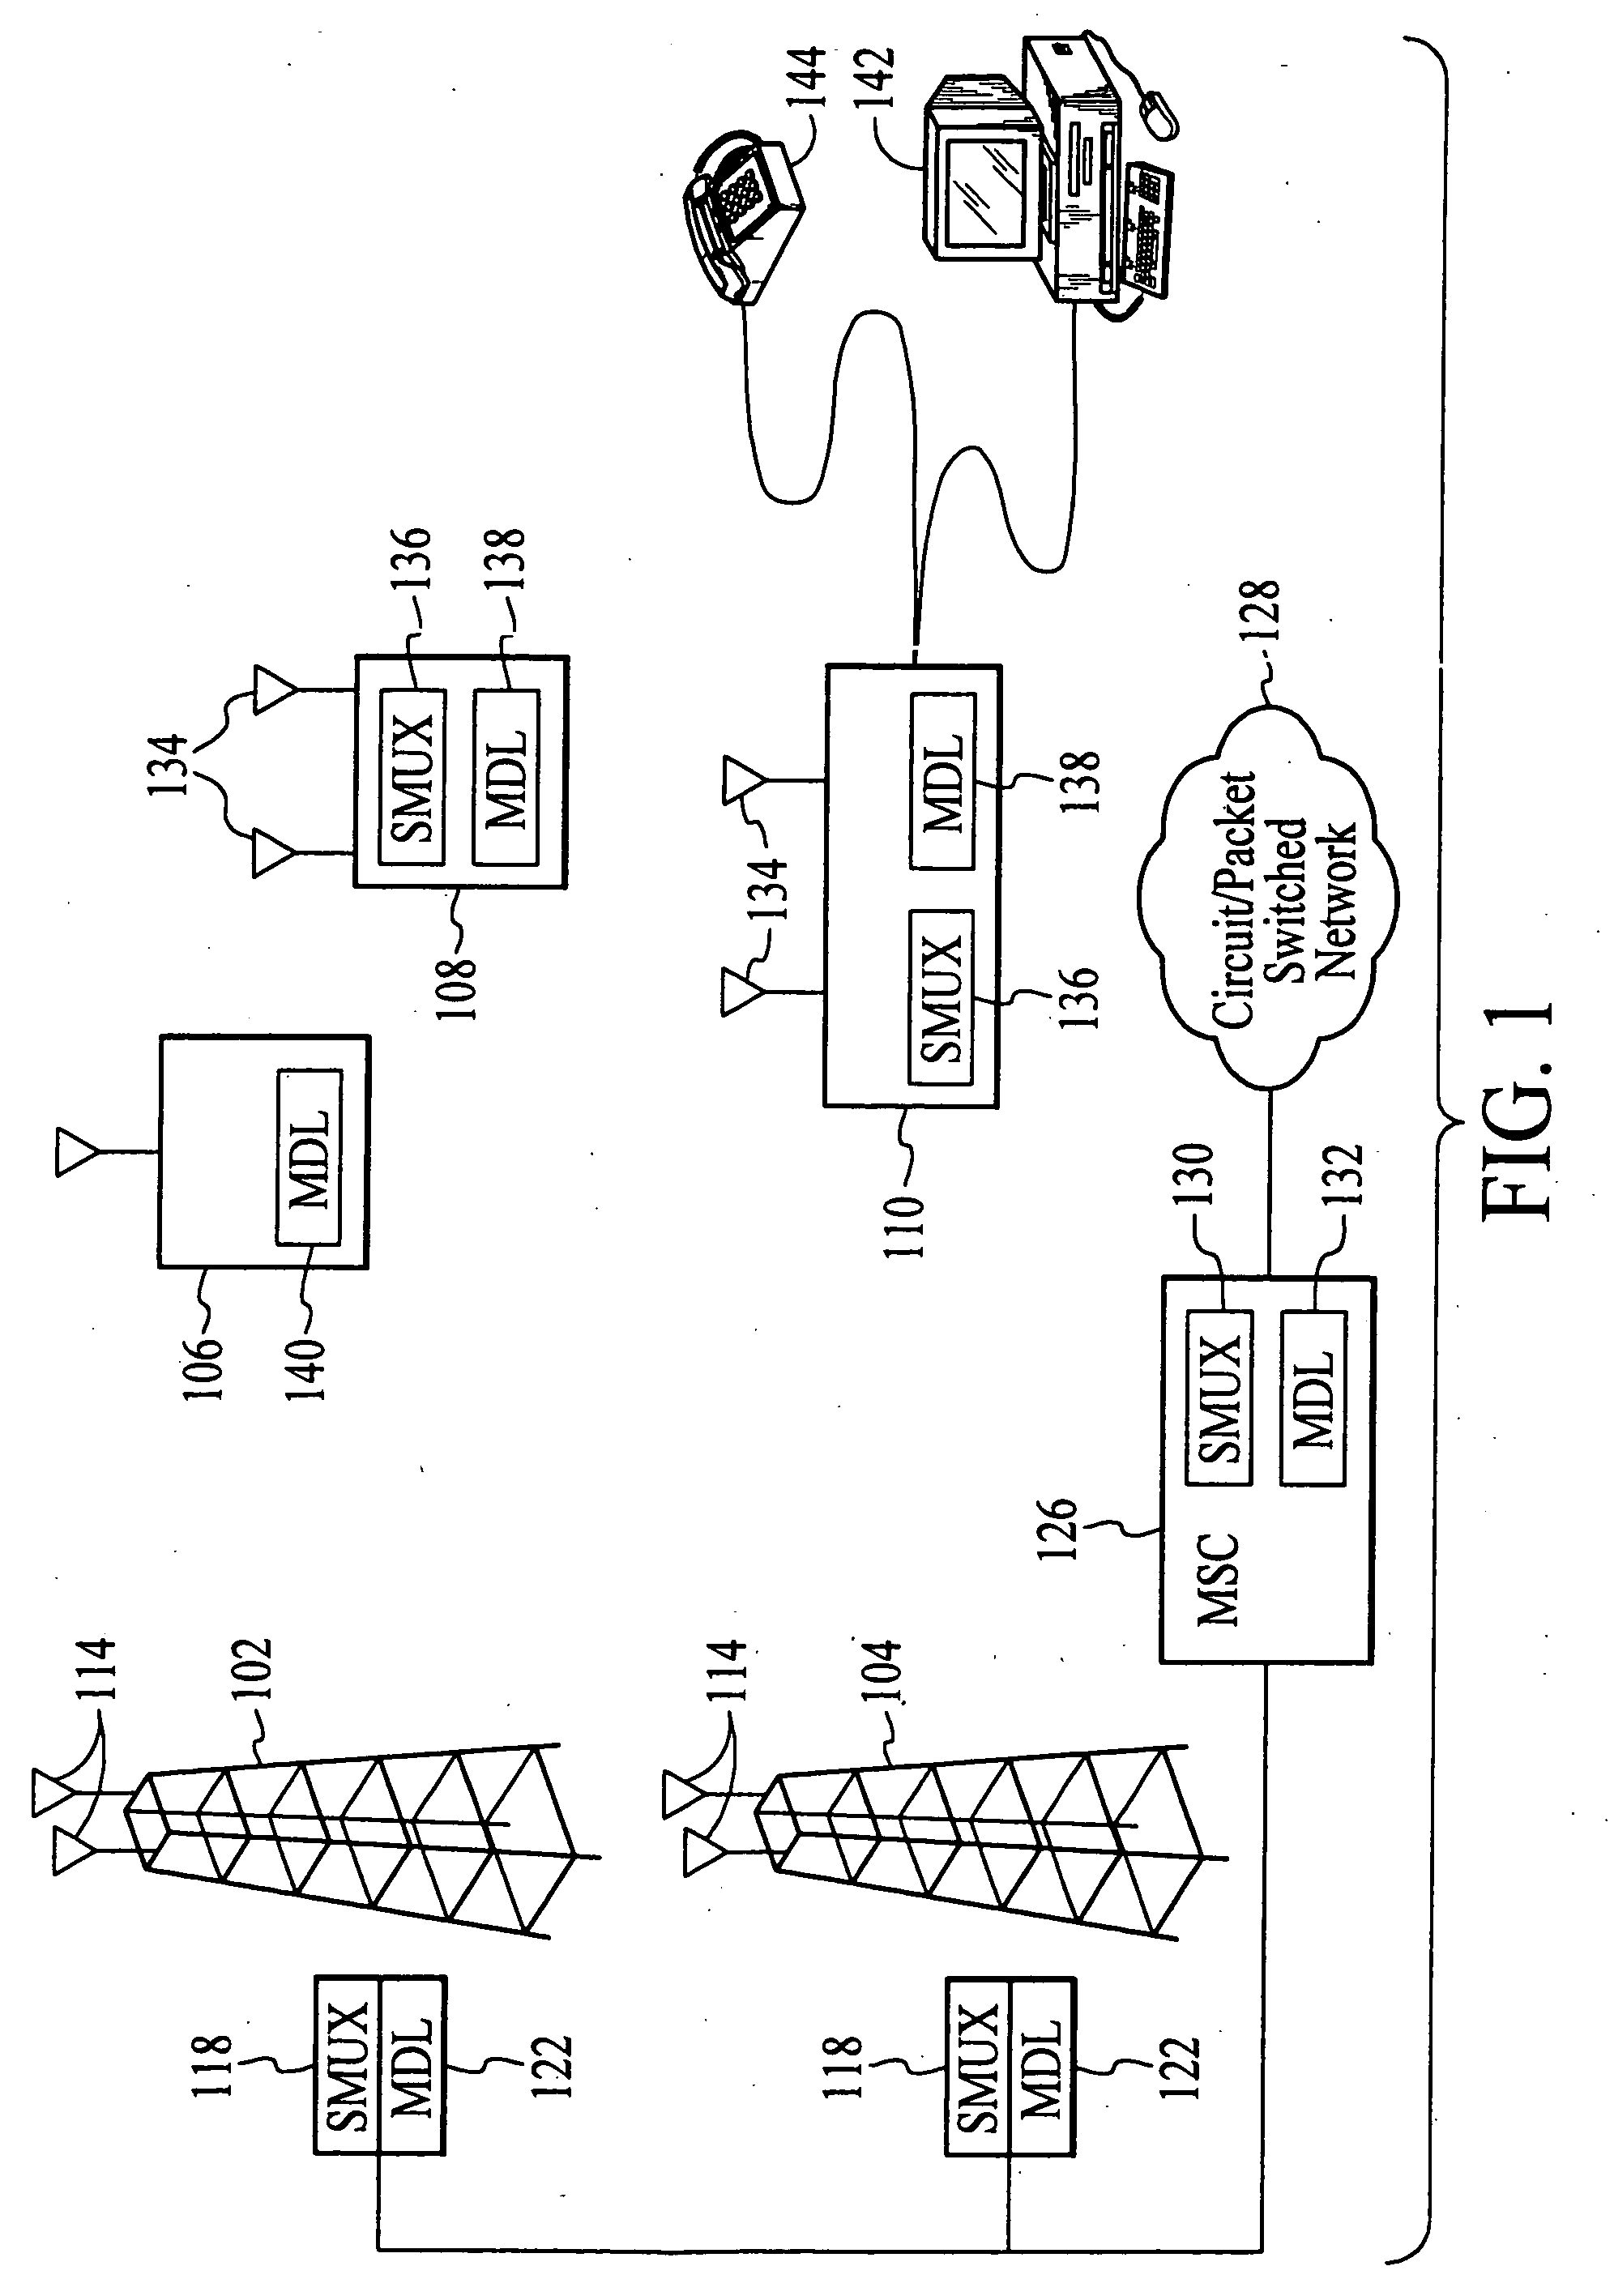 Wireless communications system that supports multiple modes of operation